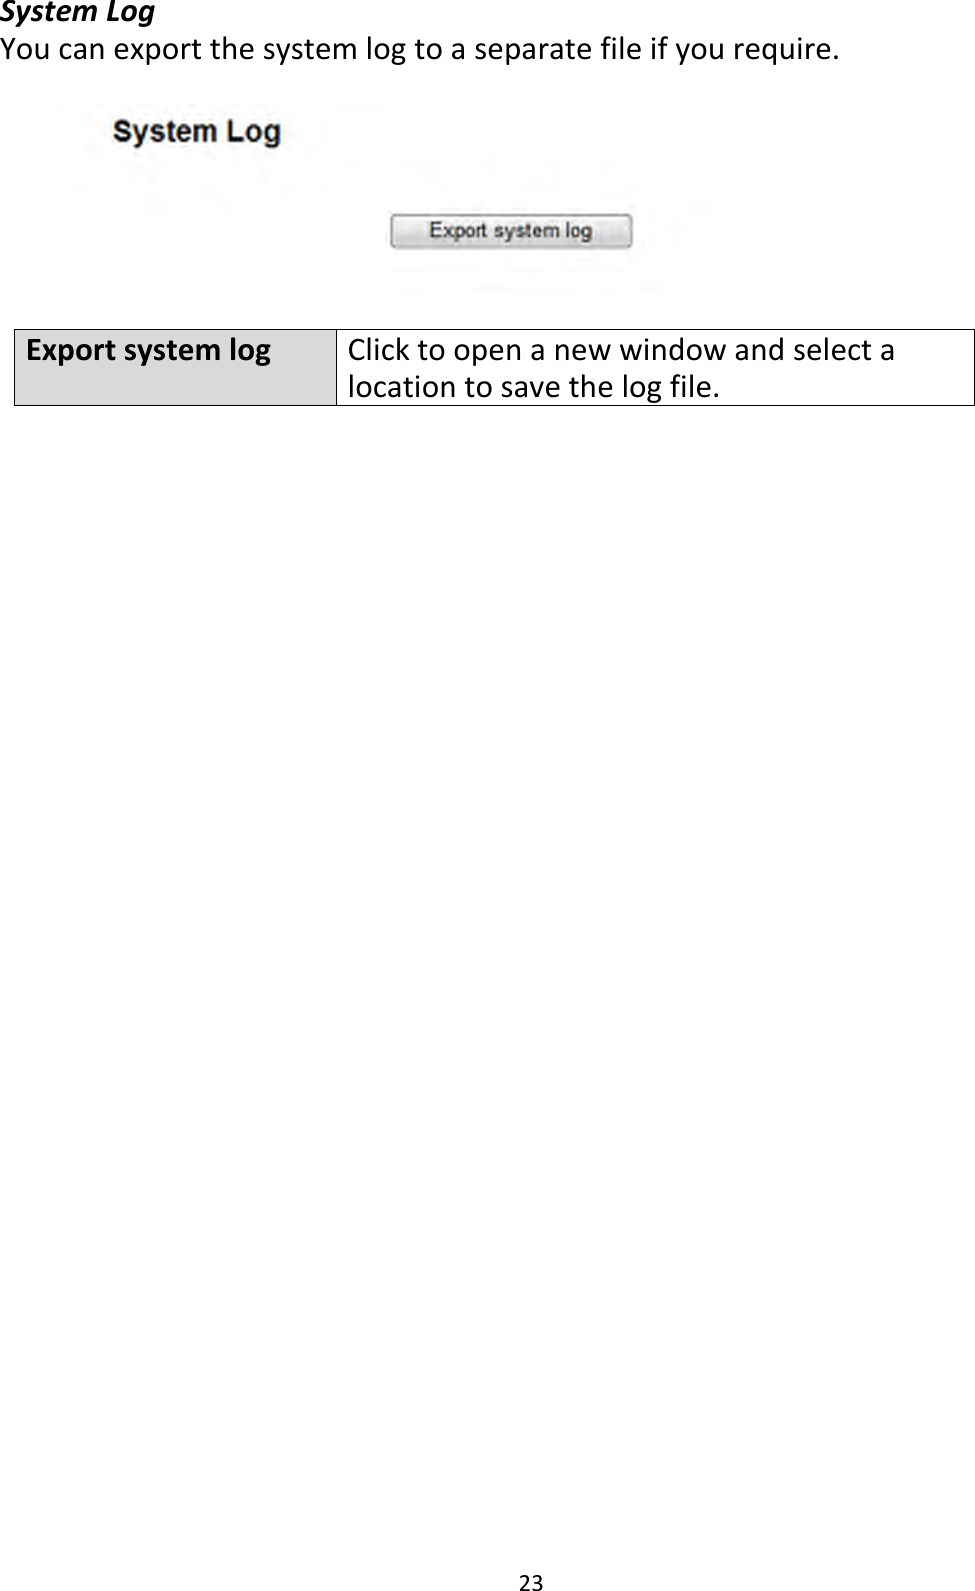 23 System Log You can export the system log to a separate file if you require.    Export system log Click to open a new window and select a location to save the log file.          